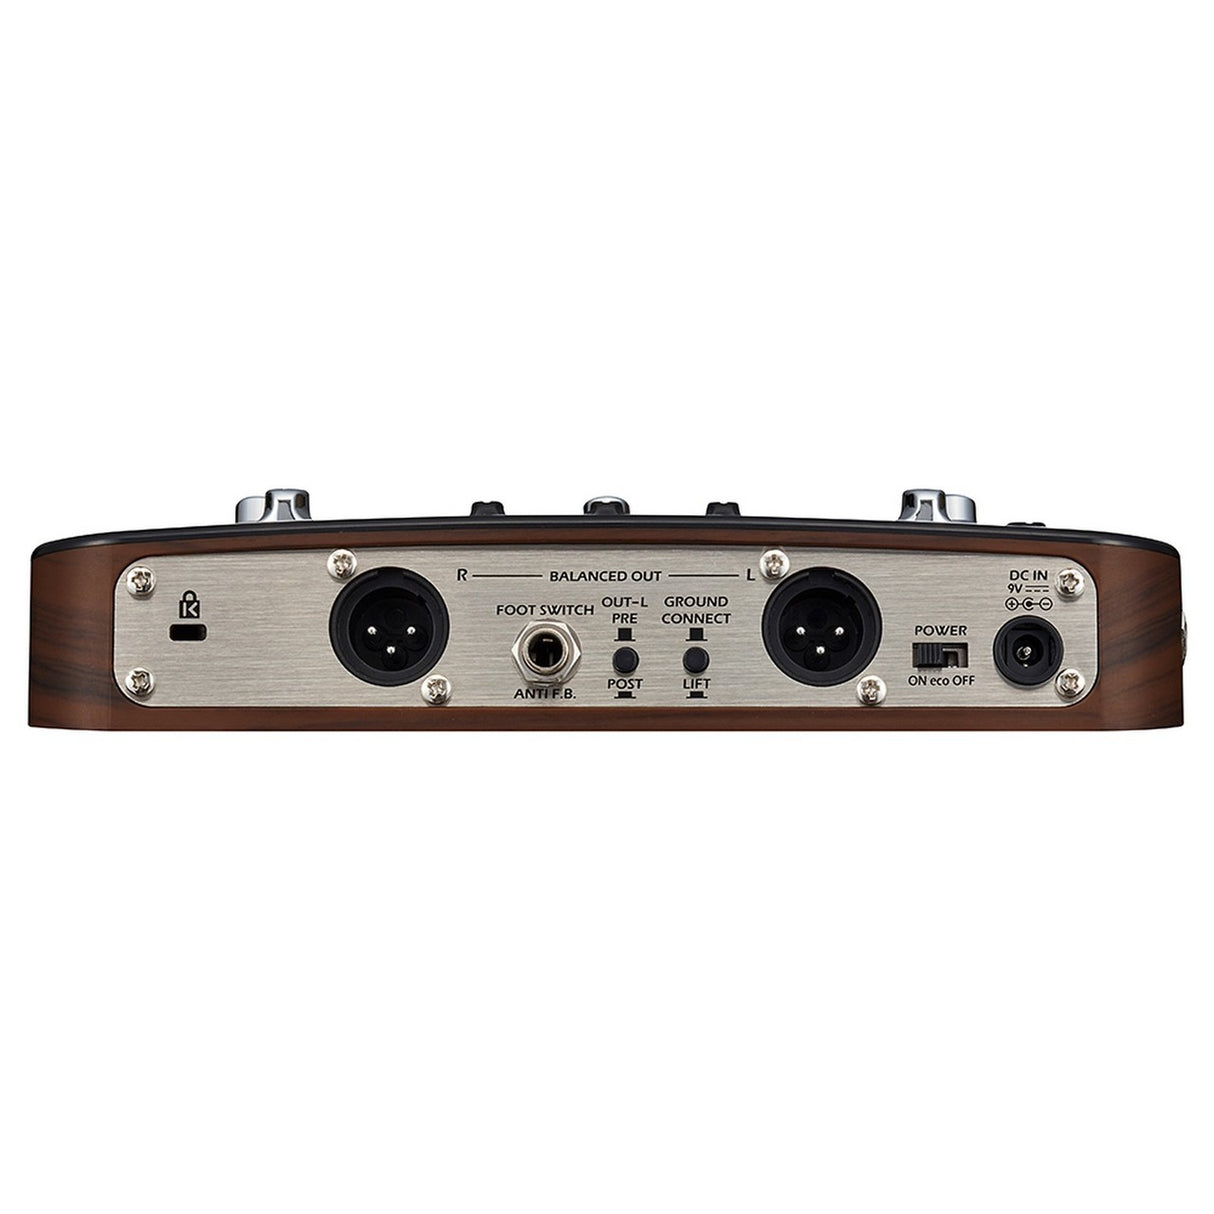 Zoom AC-3 | Acoustic Creator DI Box and Preamp with Effects